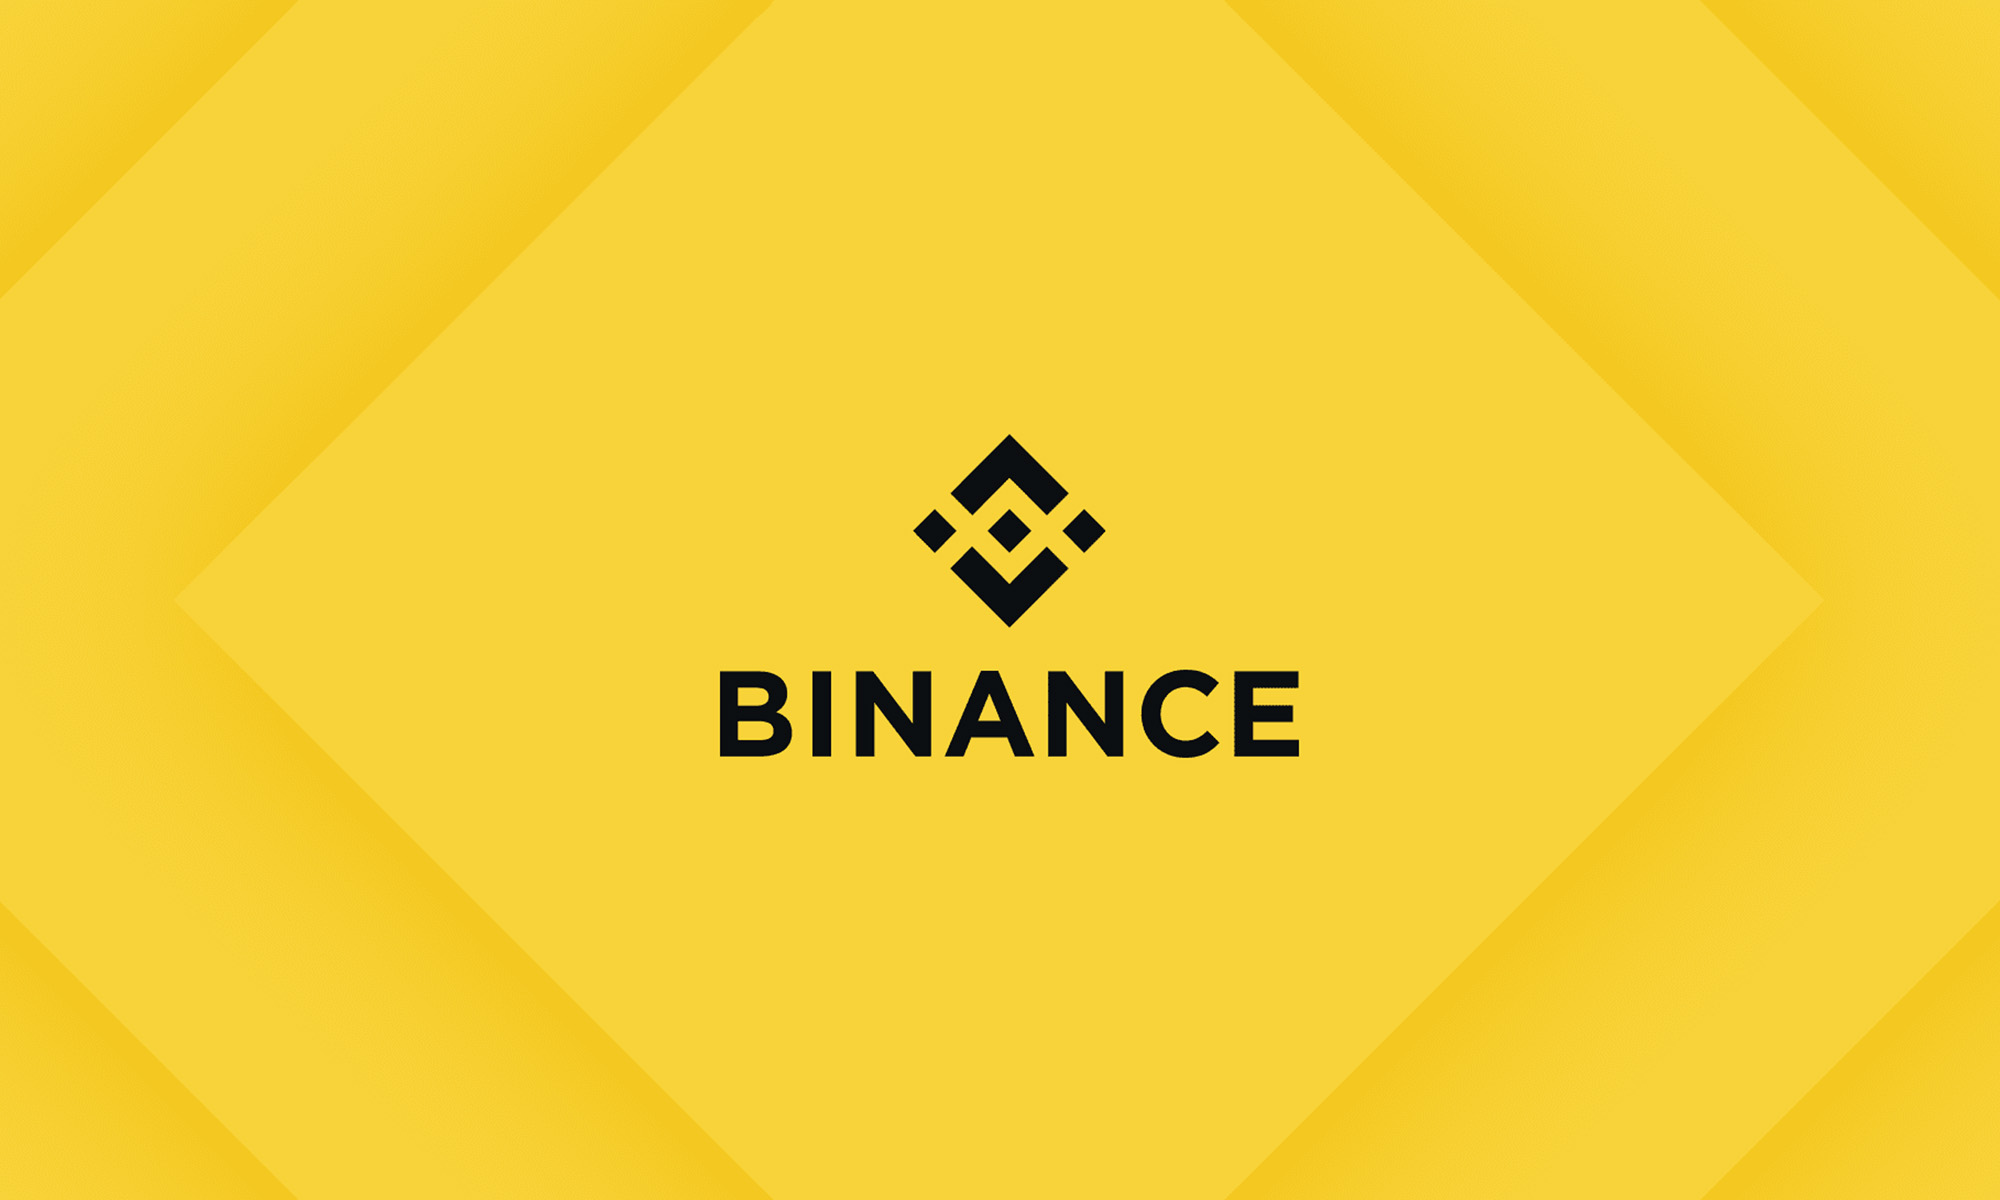 binance receives virtual assets license to operate in dubai